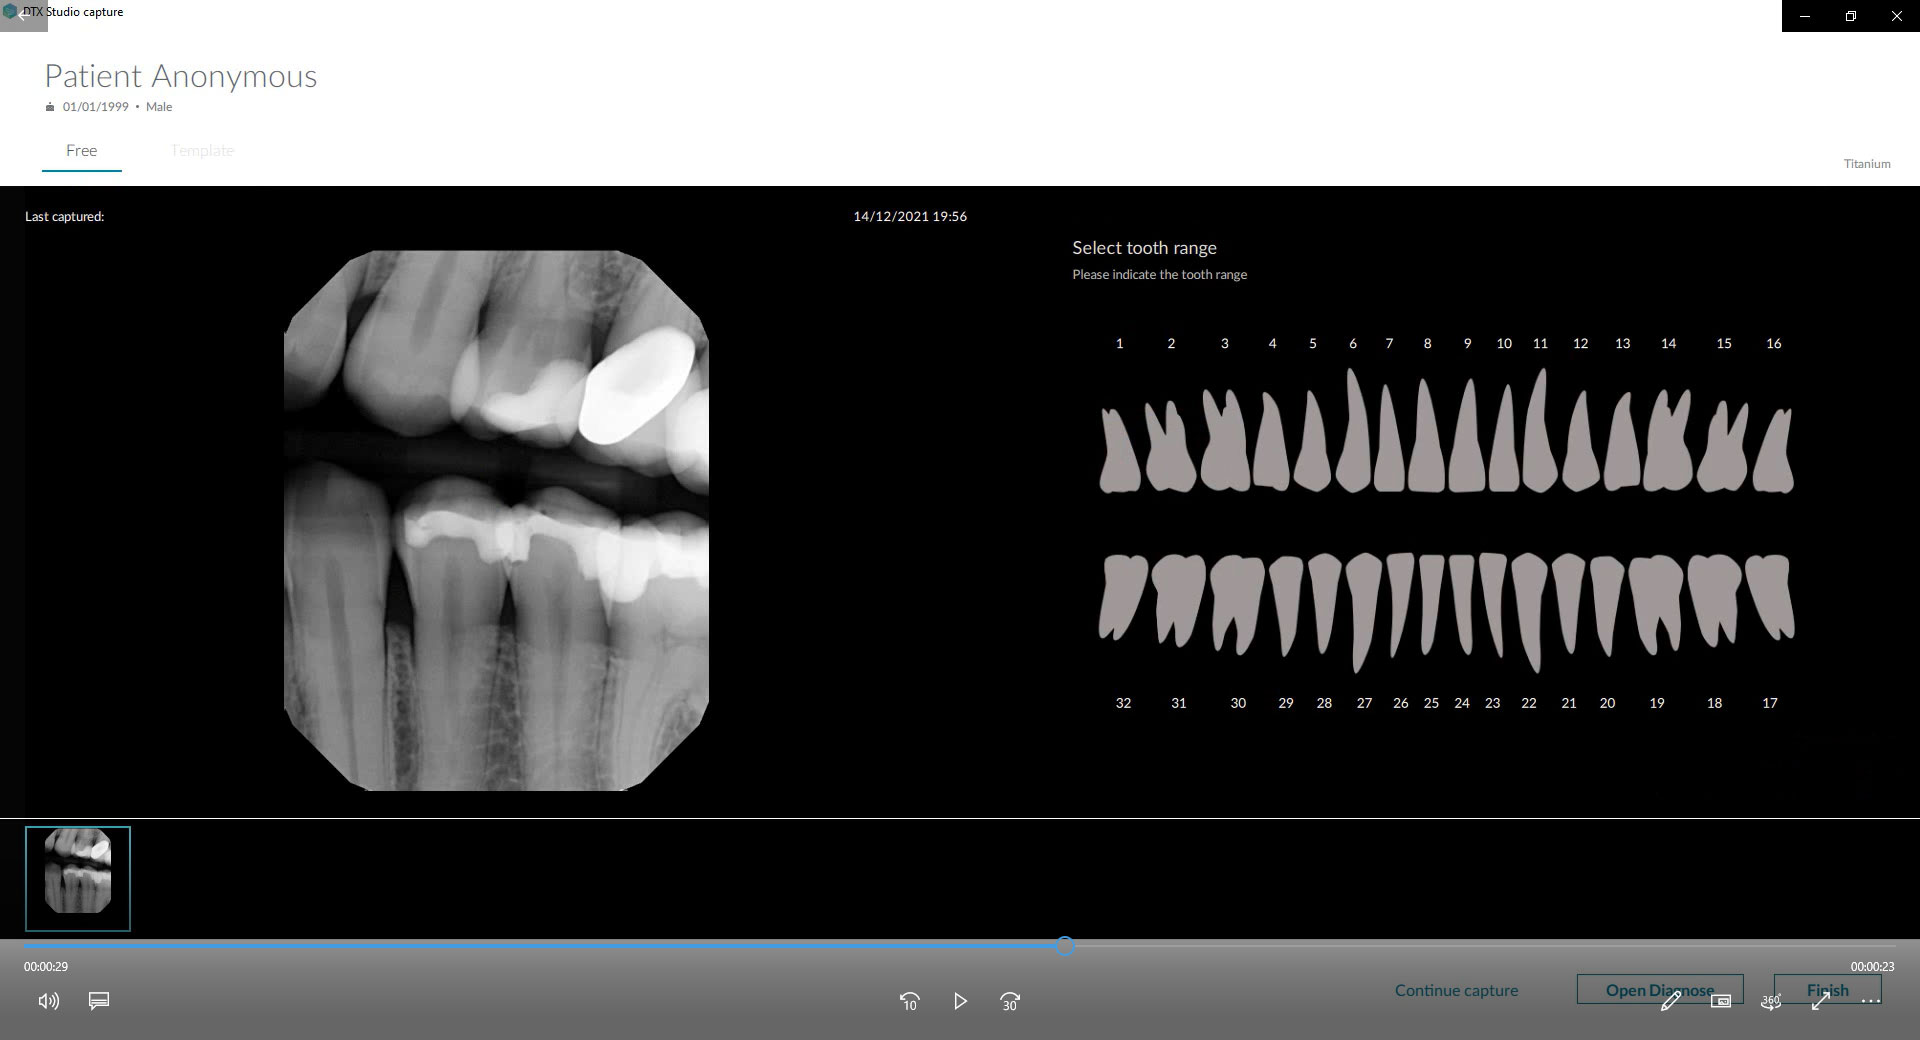 Autorotation of Acquired Intraoral X-Ray Images